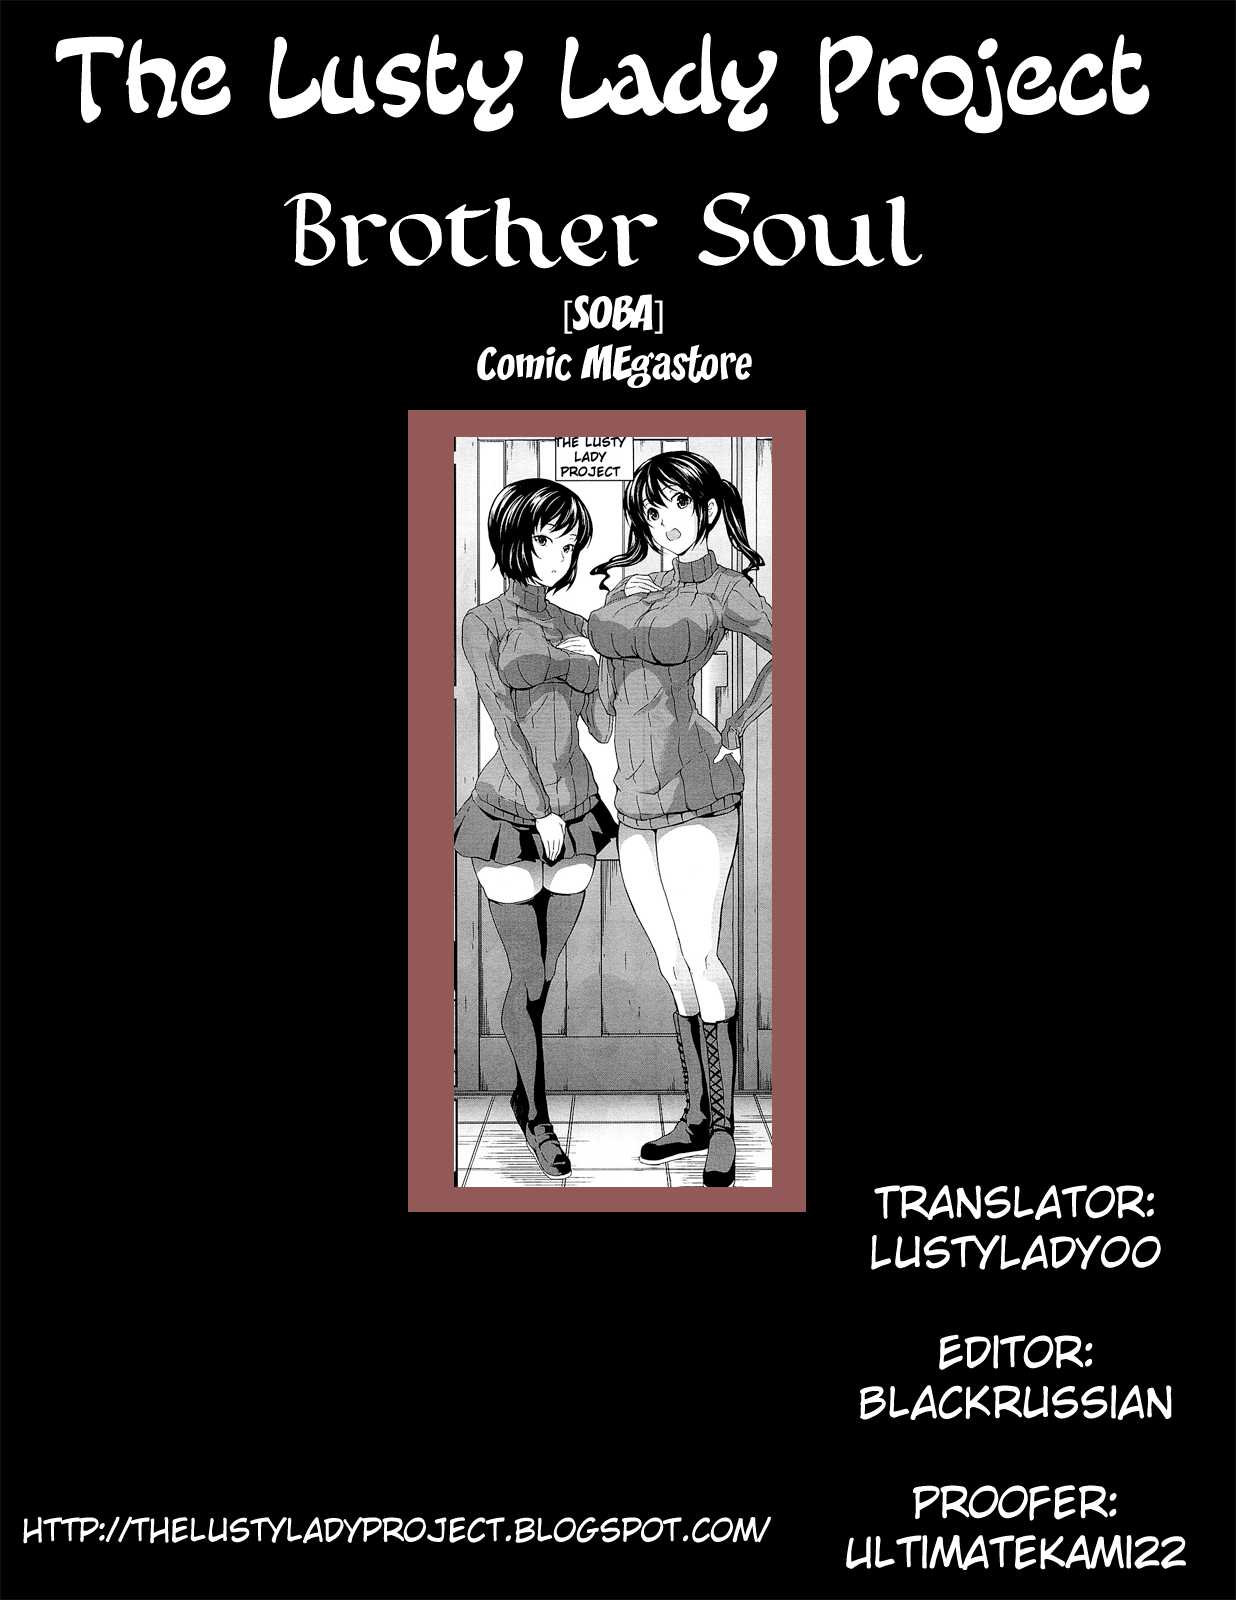 [soba] Brother Soul (COMIC Megastore 2012-06) [English] The Lusty Lady Project 